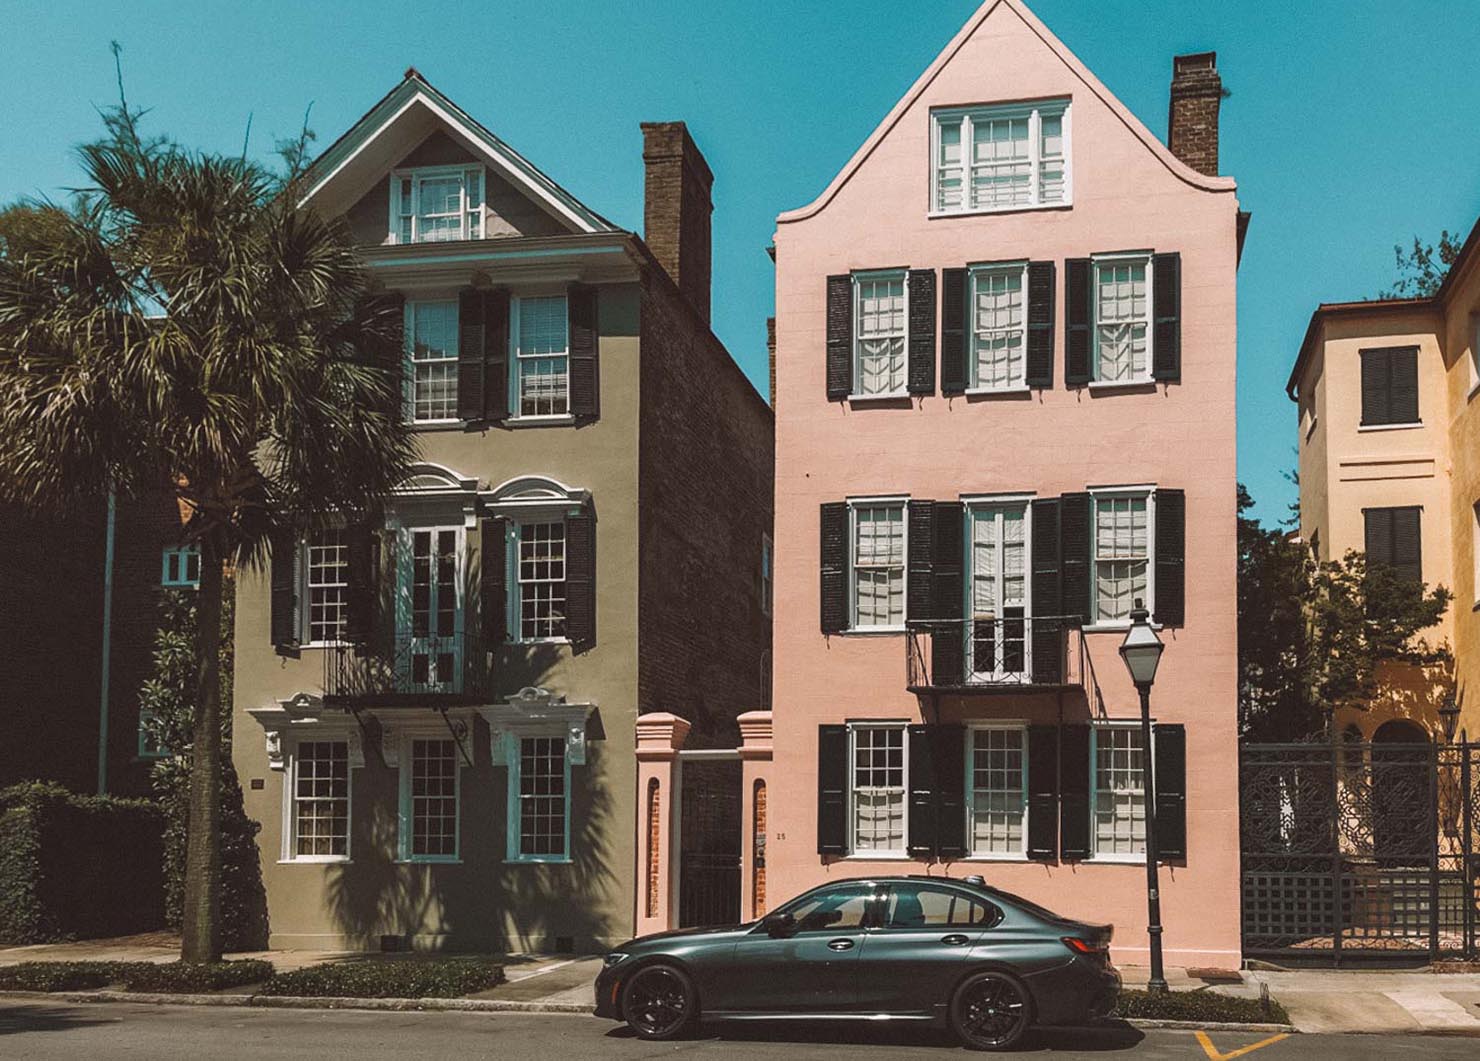 10 Most Instagrammable Places in Charleston - Where to Take Stunning Photos  of Charleston to Impress Your Friends? – Go Guides